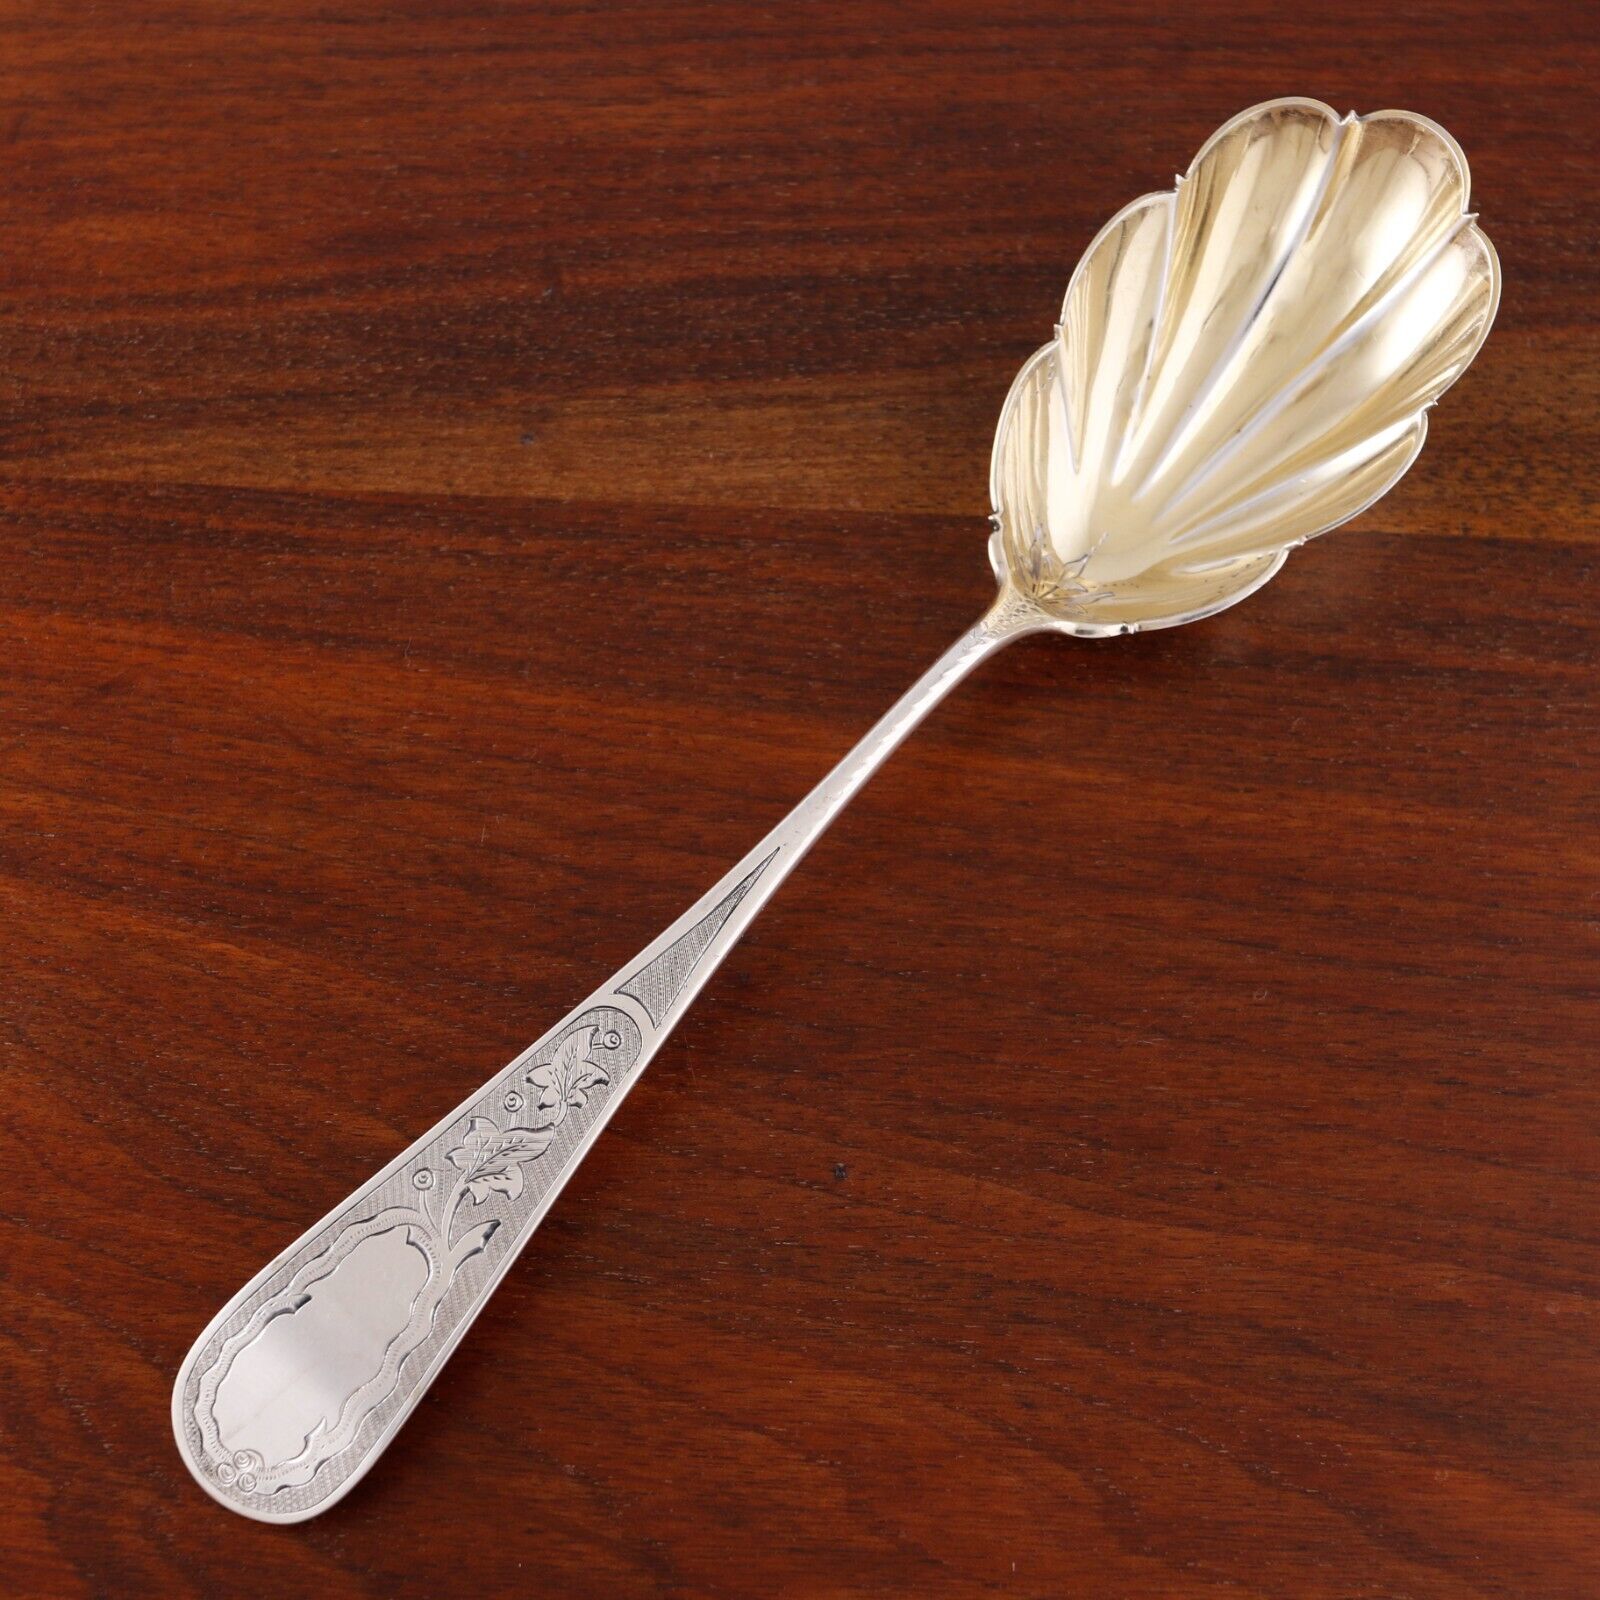 Antique Valuations: SUPERB GEORGE SHARP AESTHETIC COIN SILVER SERVING SPOON LEAF & BERRY 1844-74